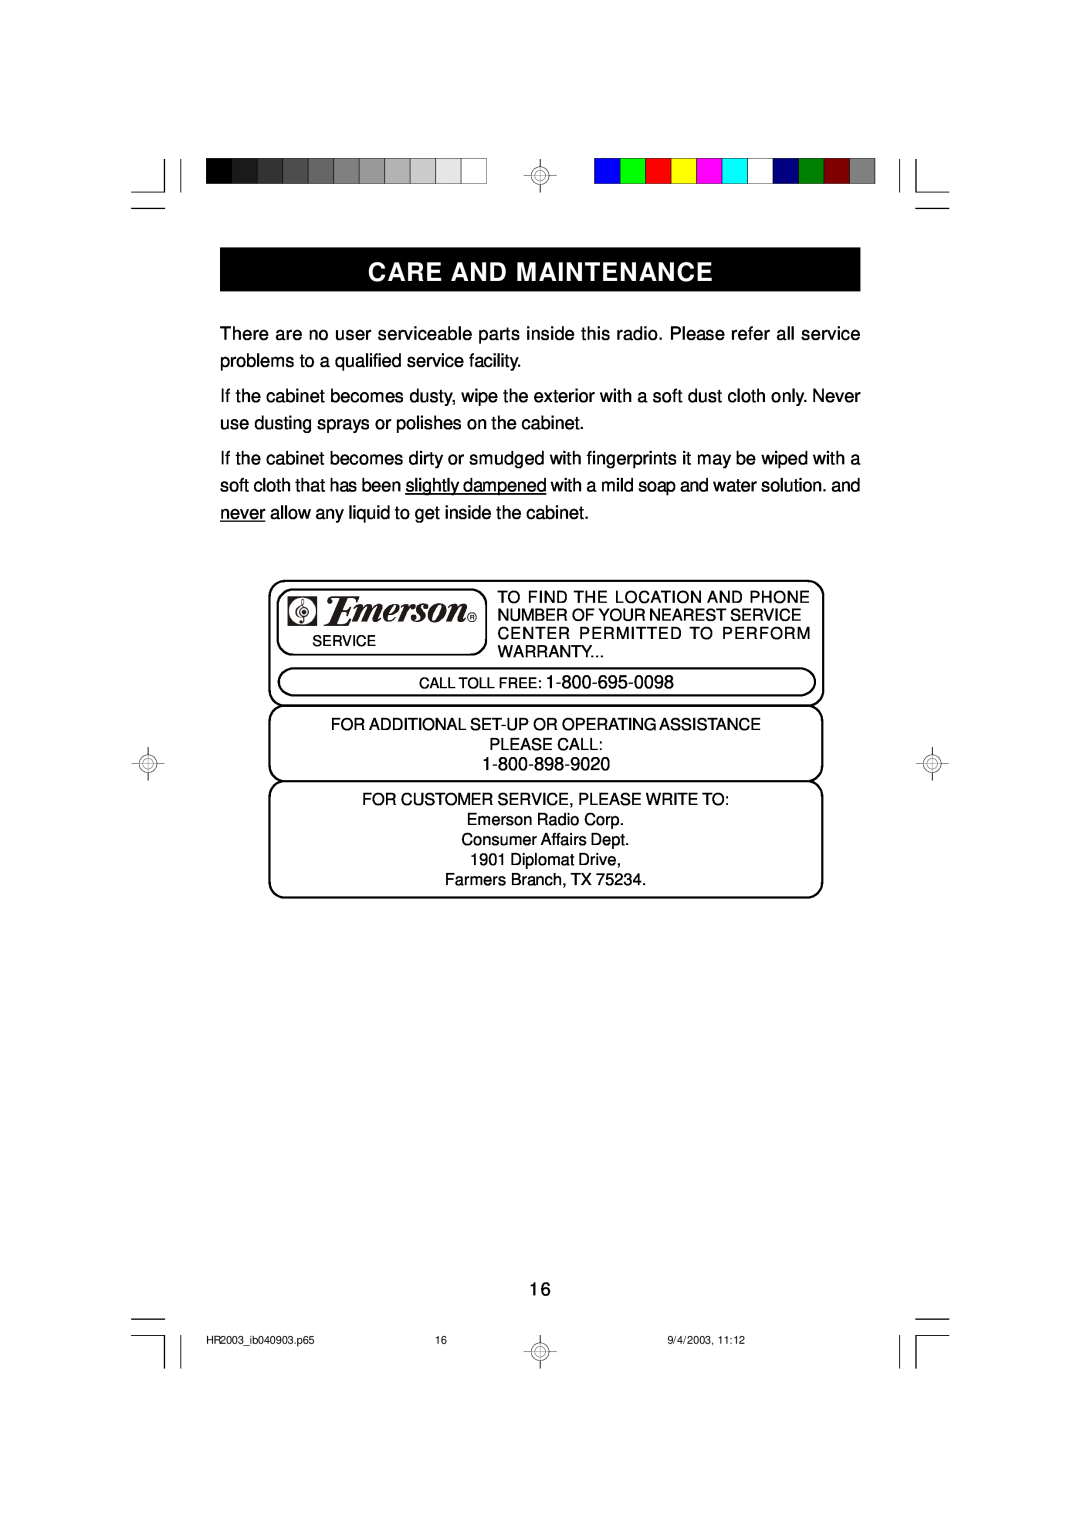 Emerson HR2003 owner manual Care And Maintenance 